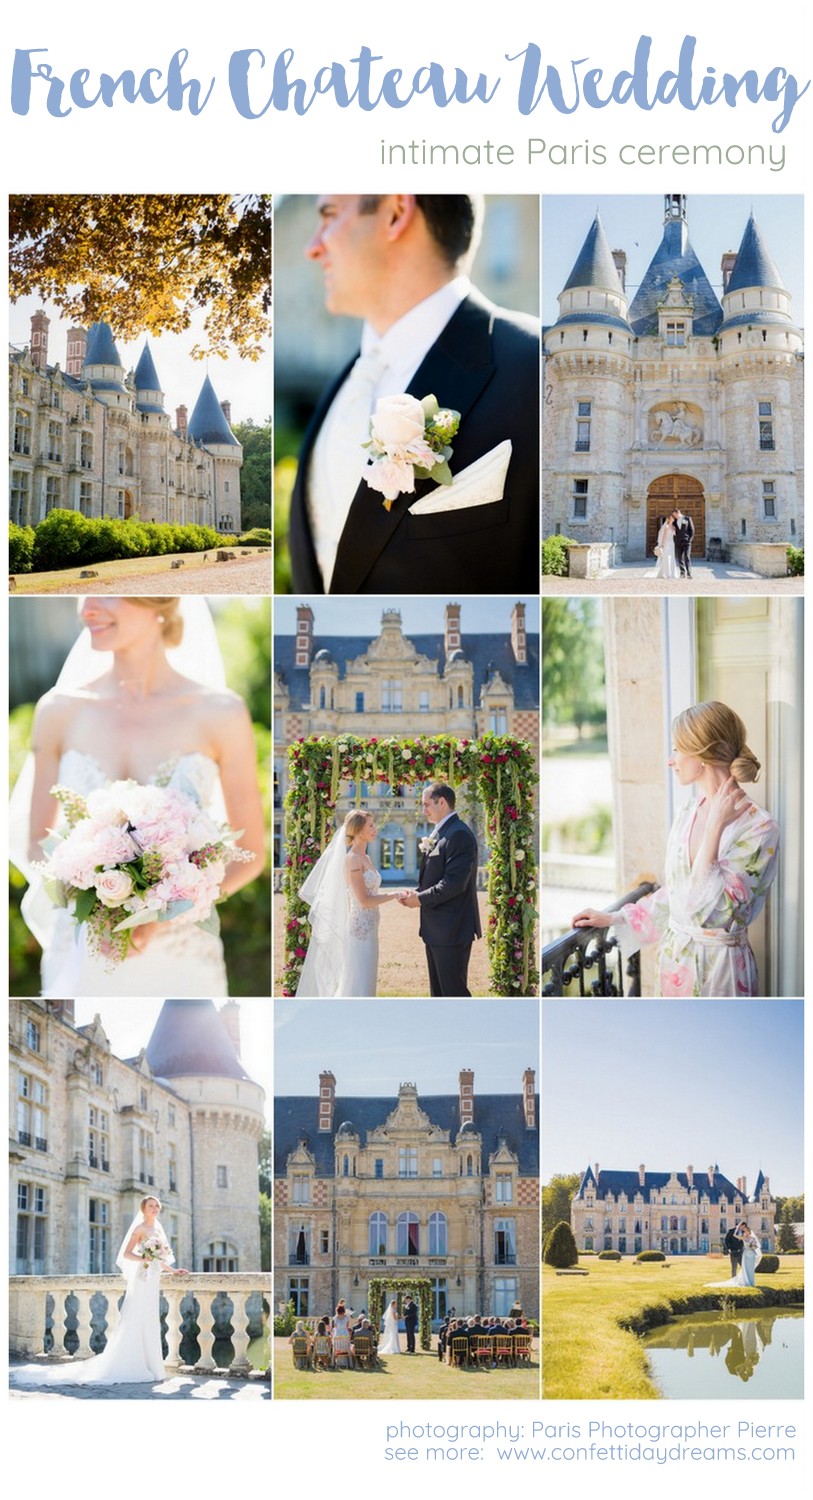 Plan an Intimate French Chateau Wedding